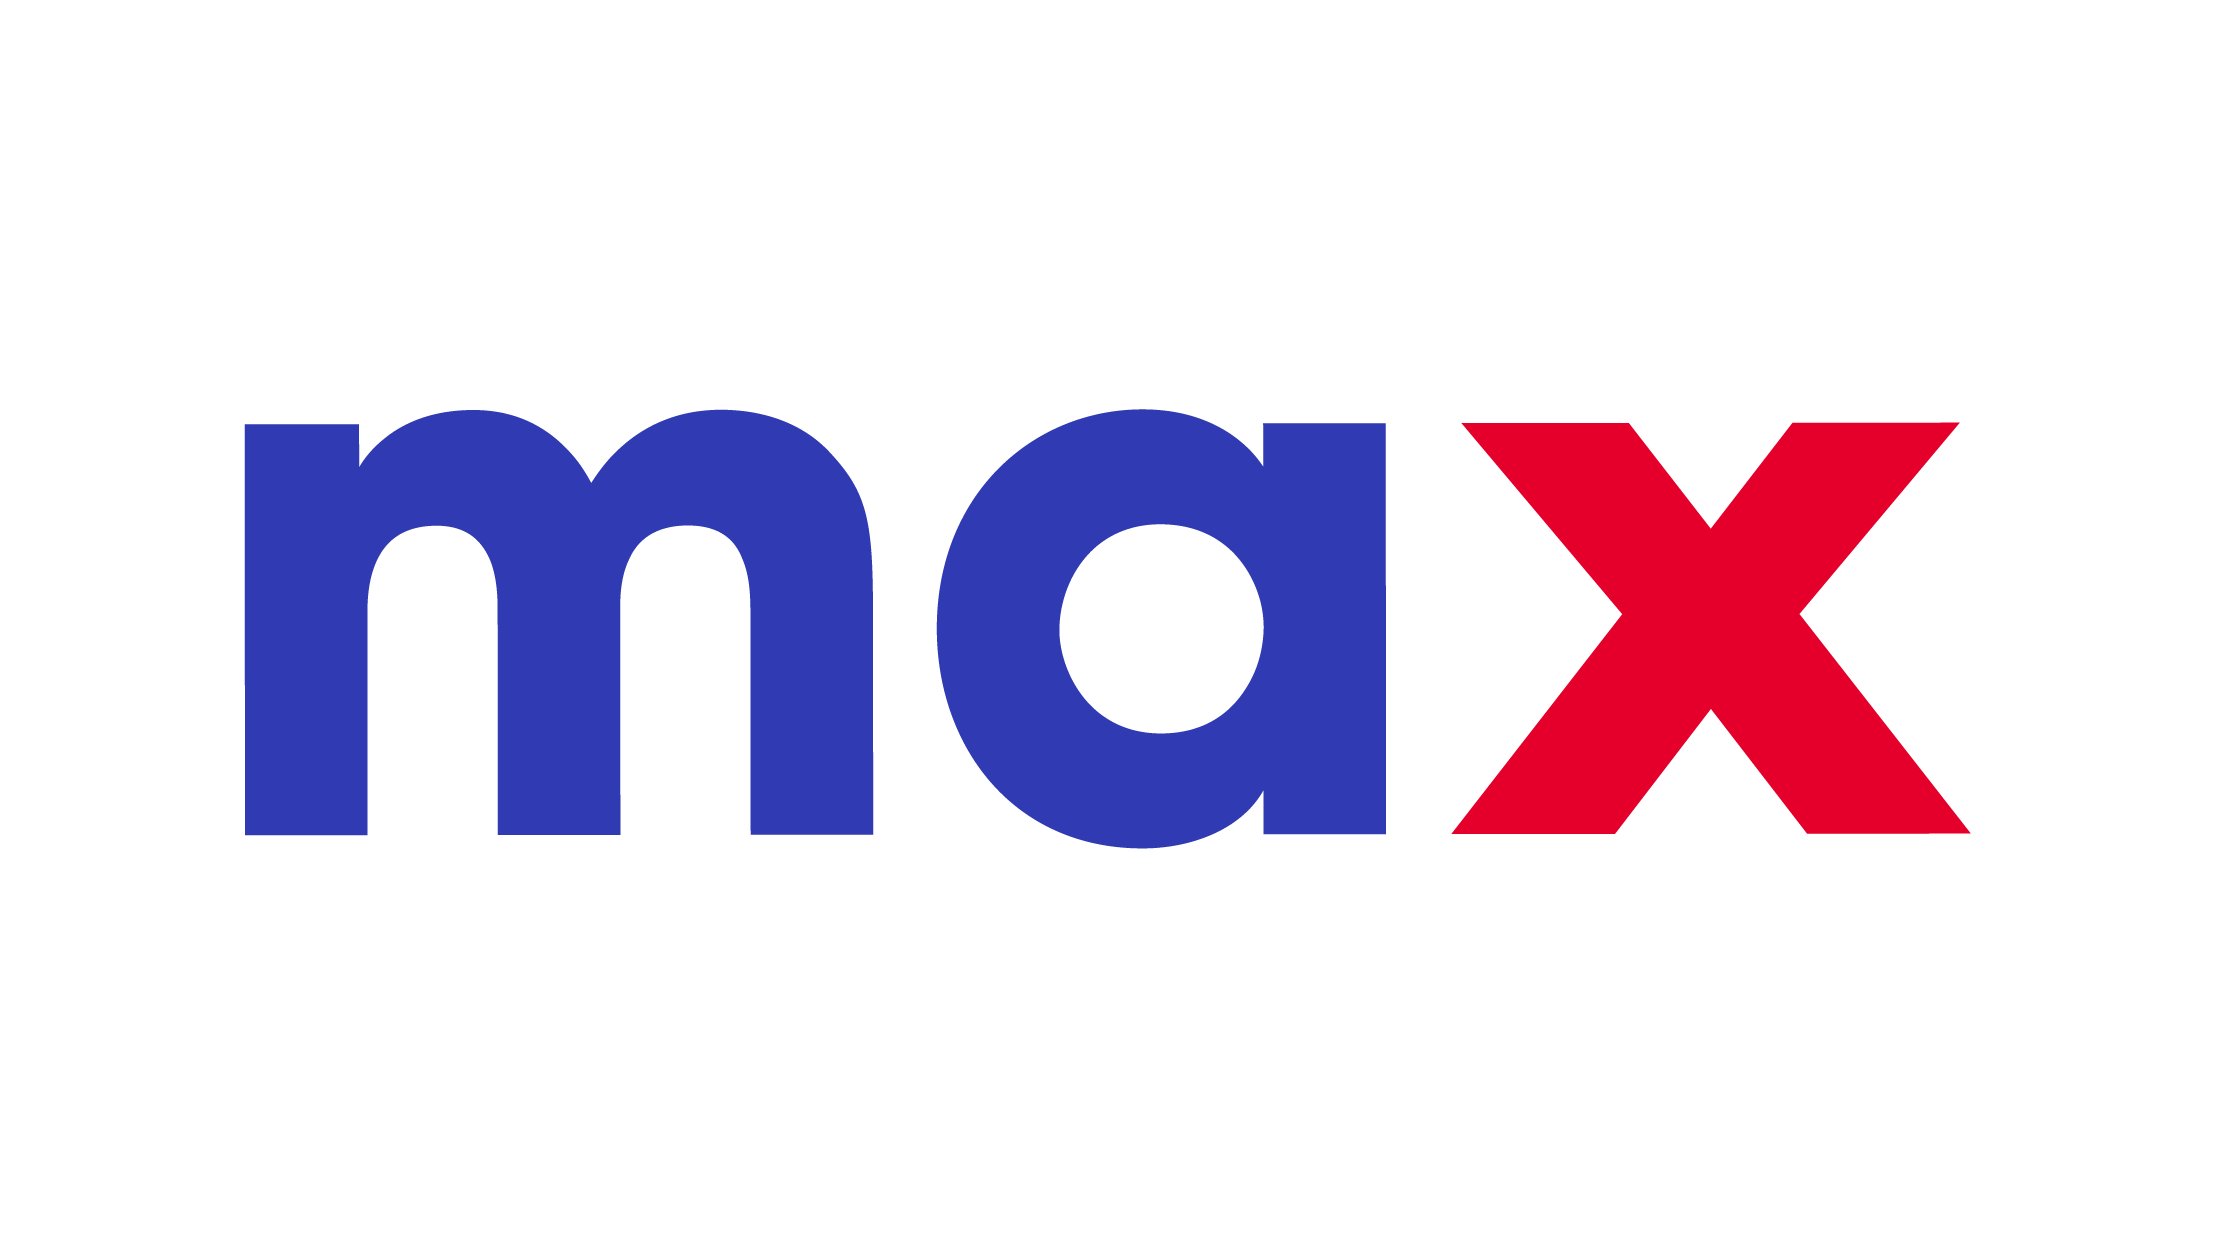 manufacture garments for max